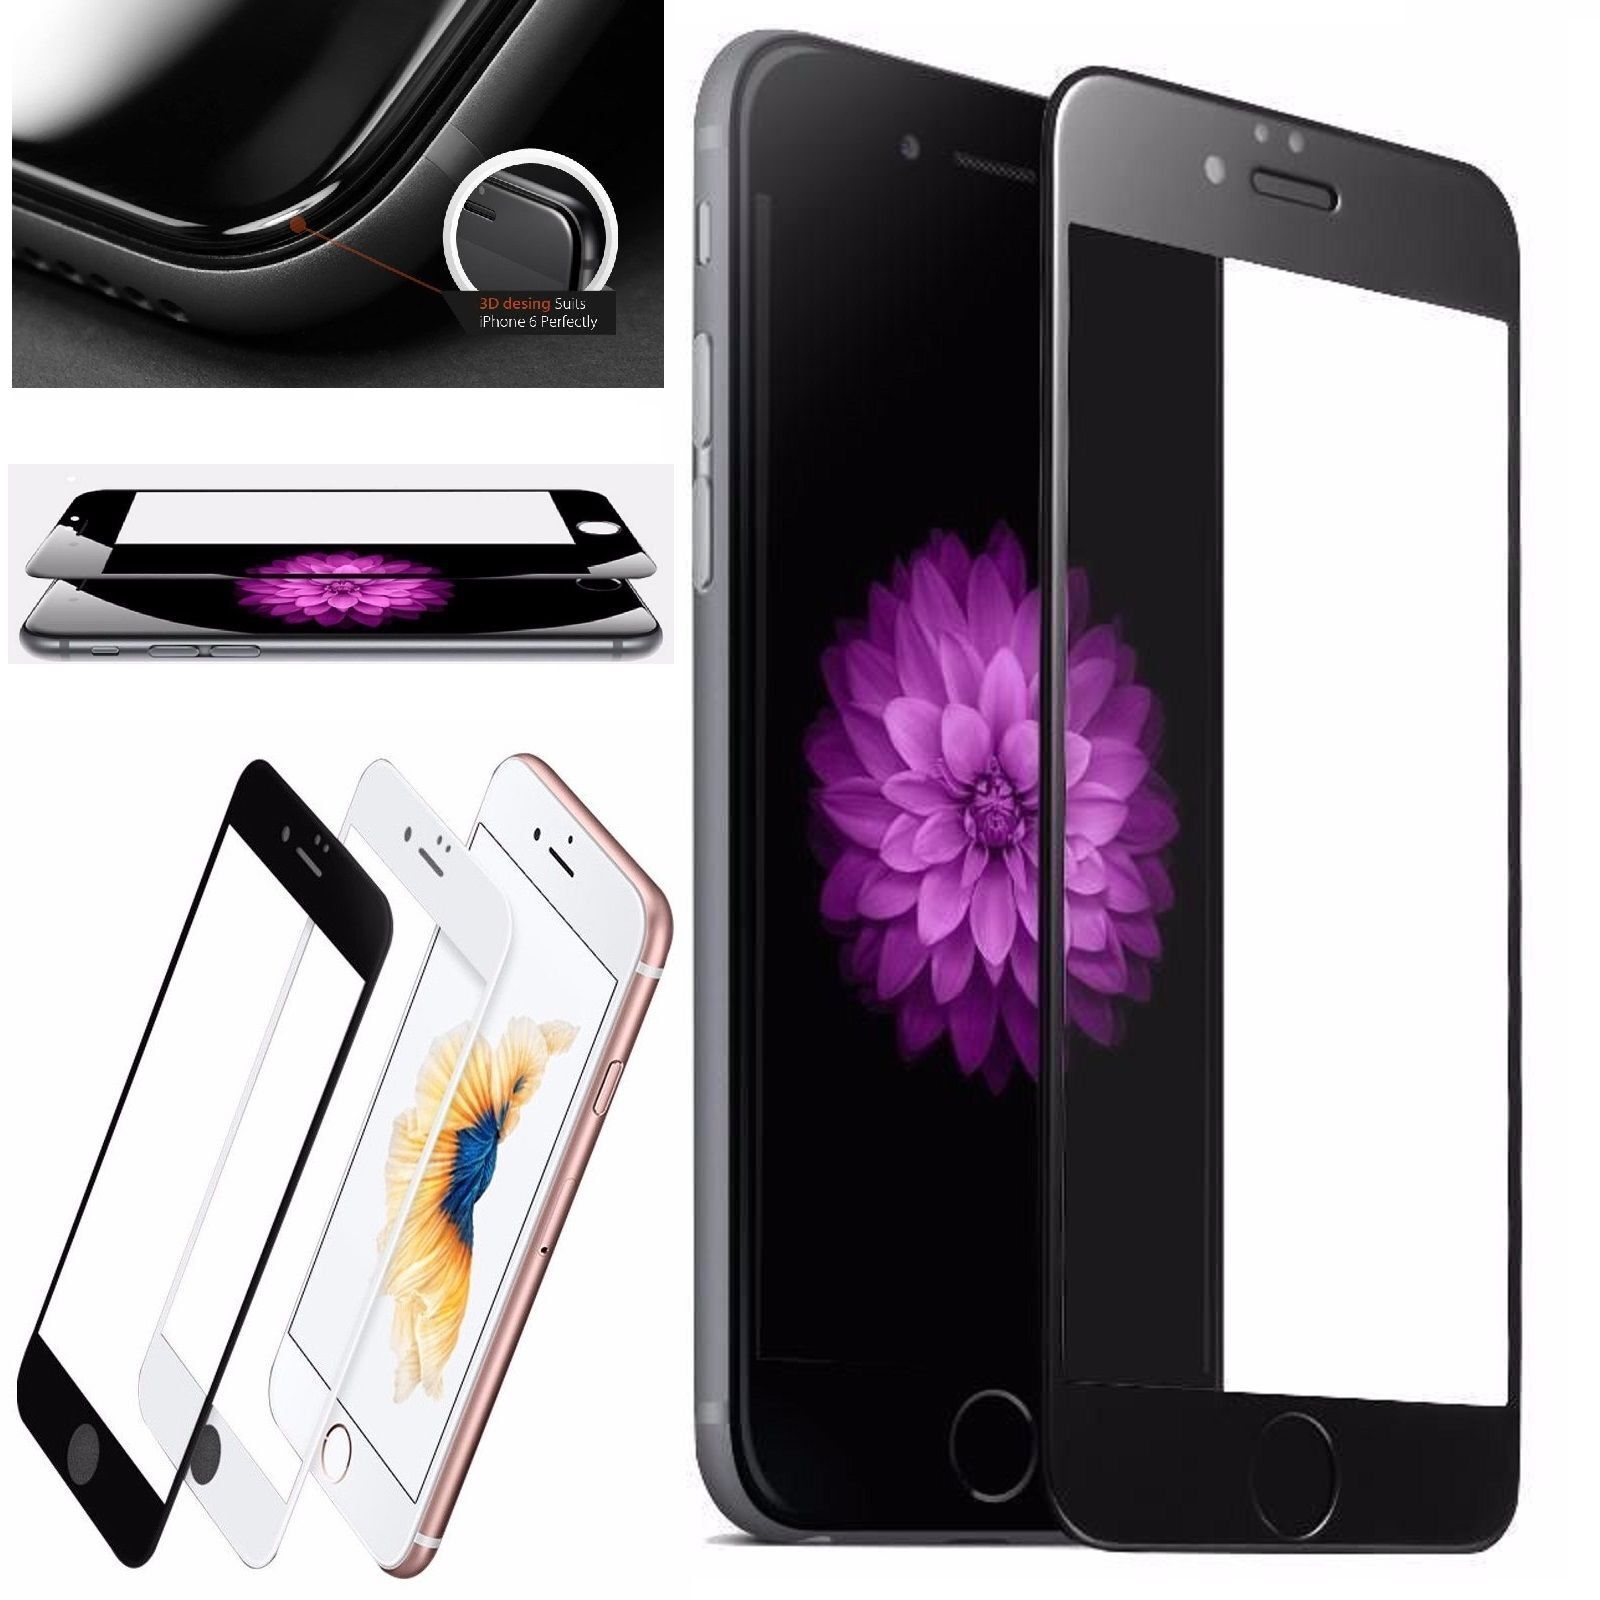 Full Coverage Tempered Glass Screen Protector for iPhone 6 /6S 7 Plus